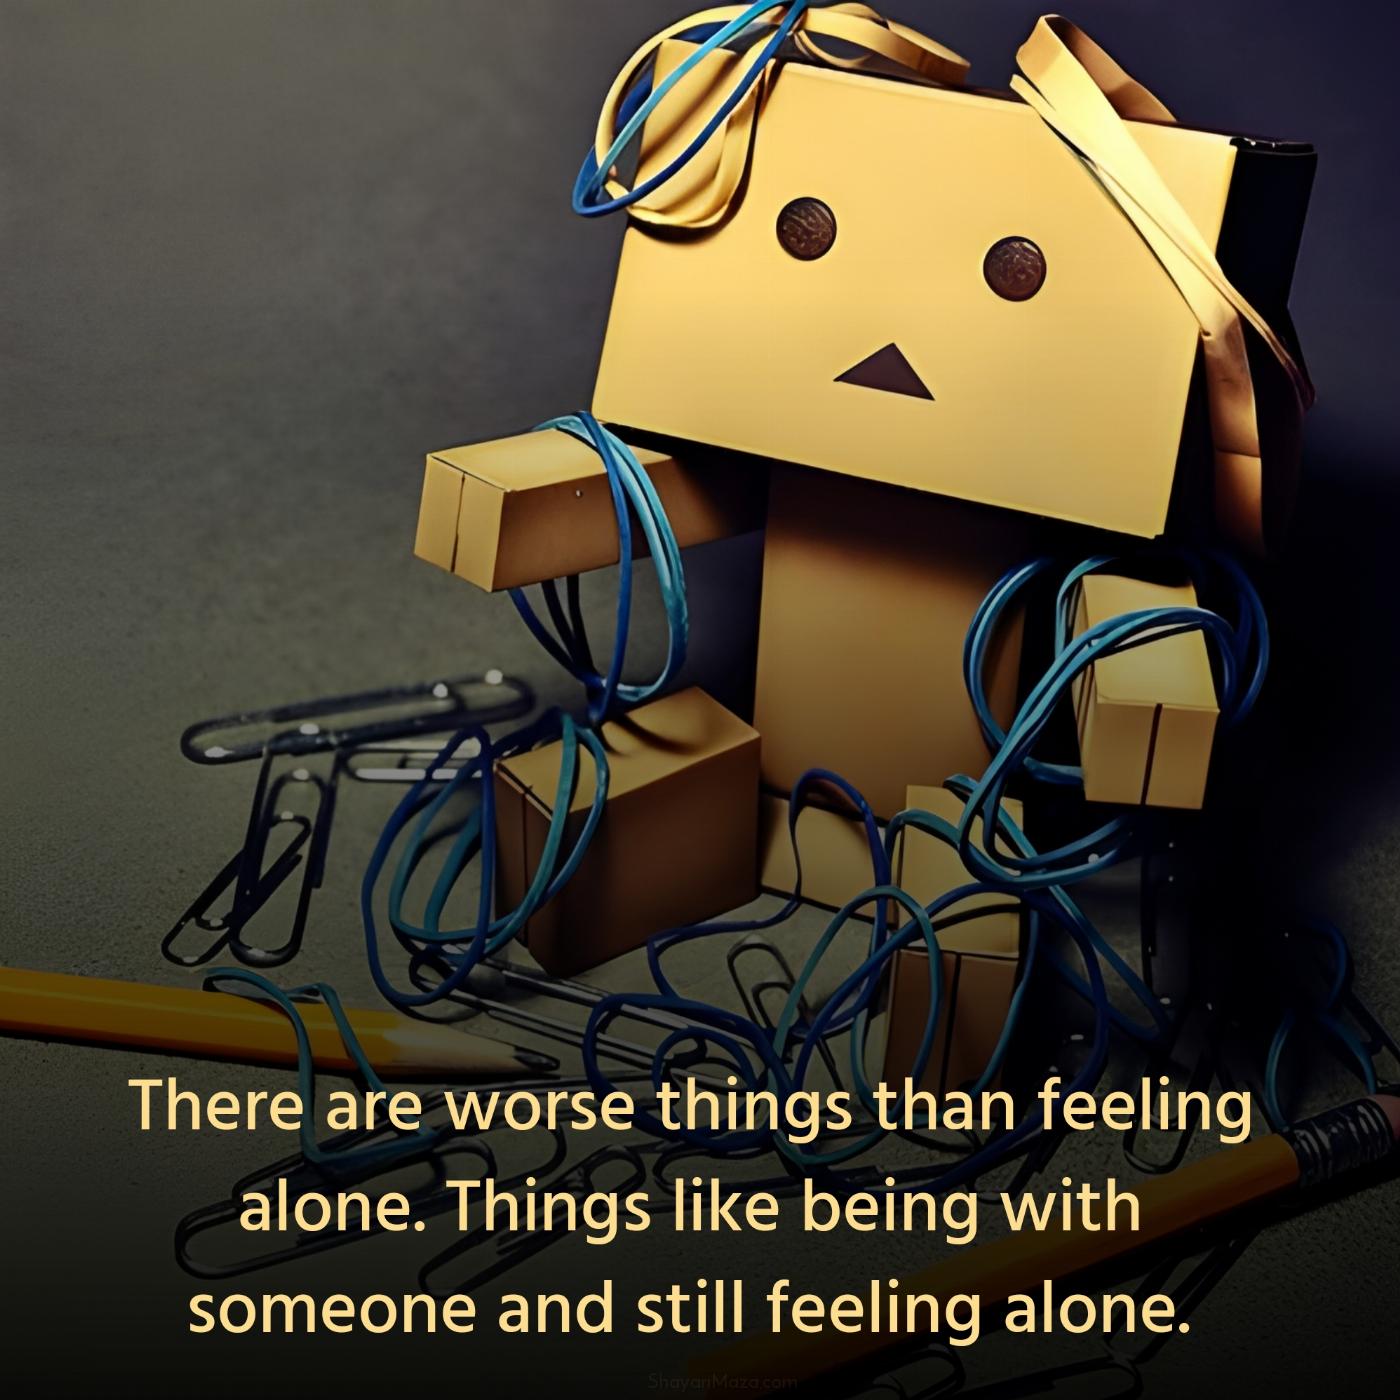 There are worse things than feeling alone